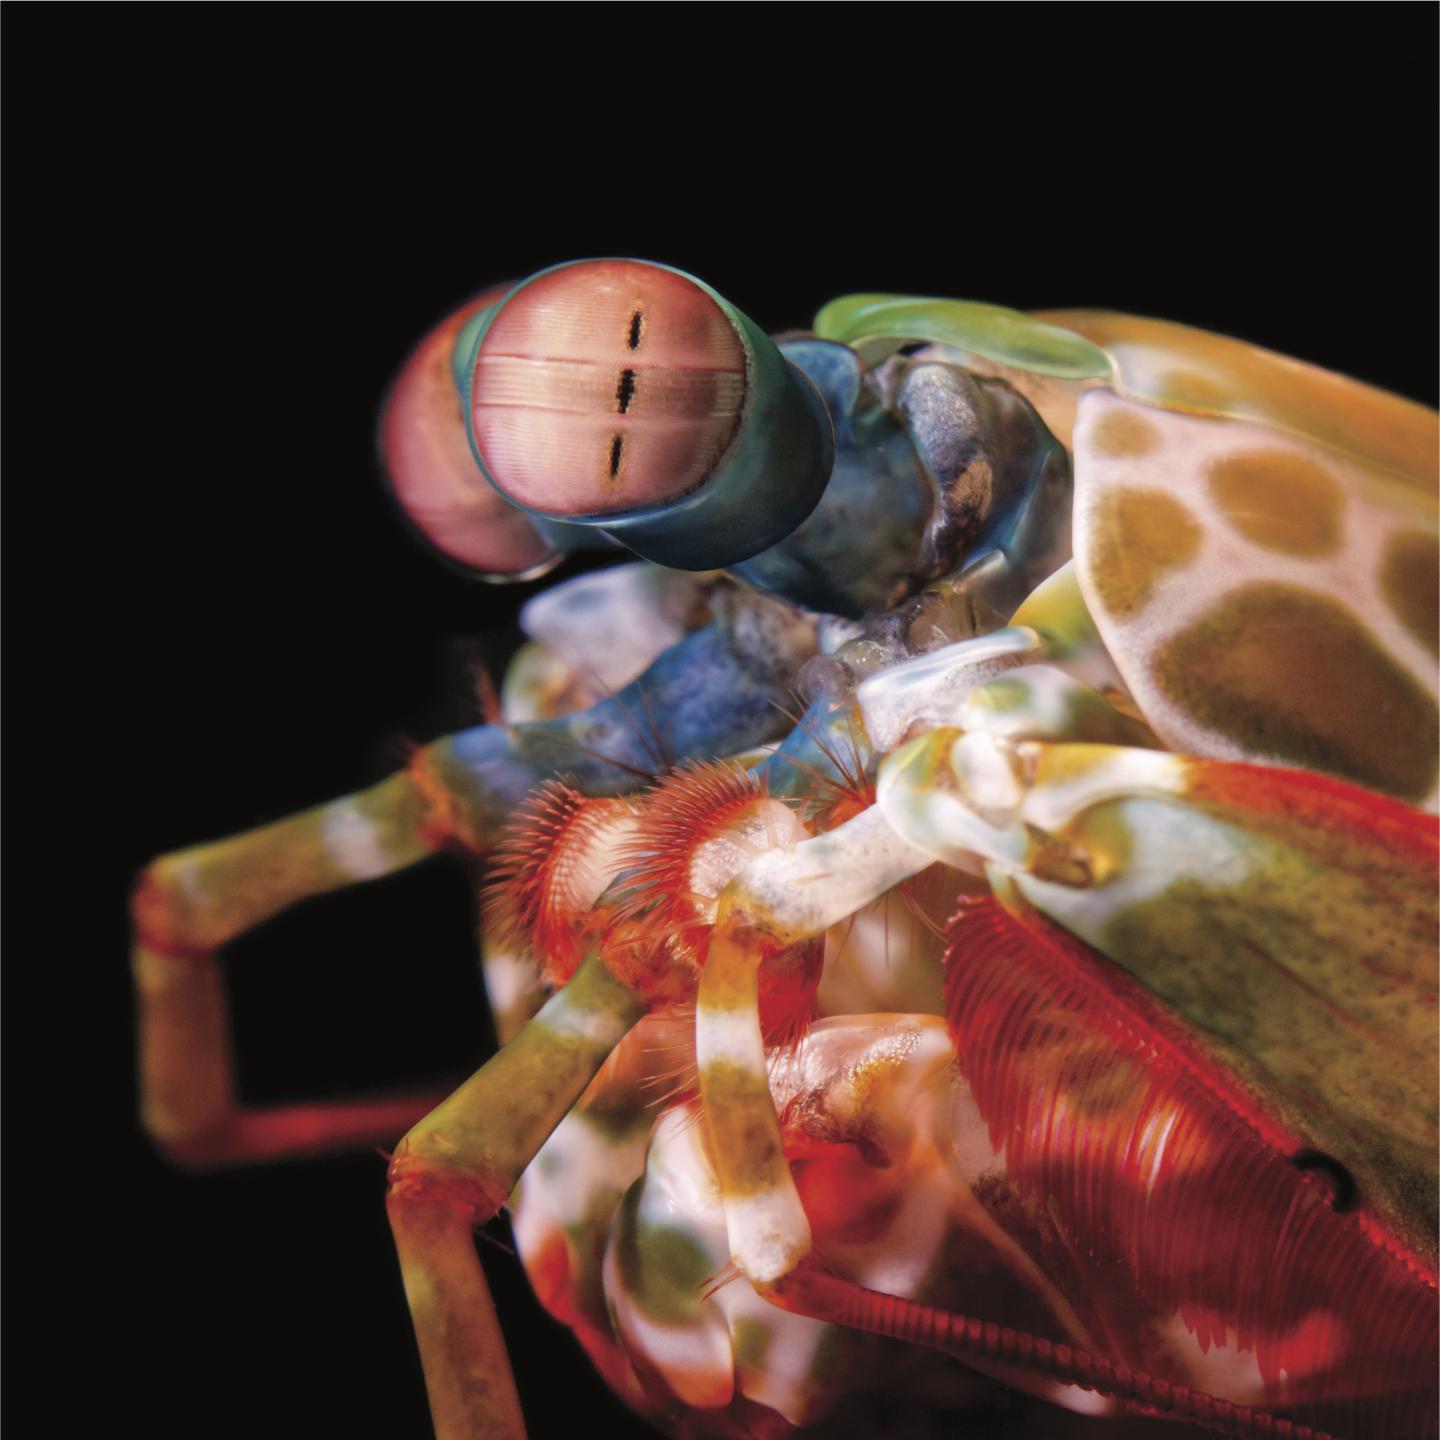 The eyes of the mantis shrimp are capable of independent rotation in all three rotational degrees of freedom.